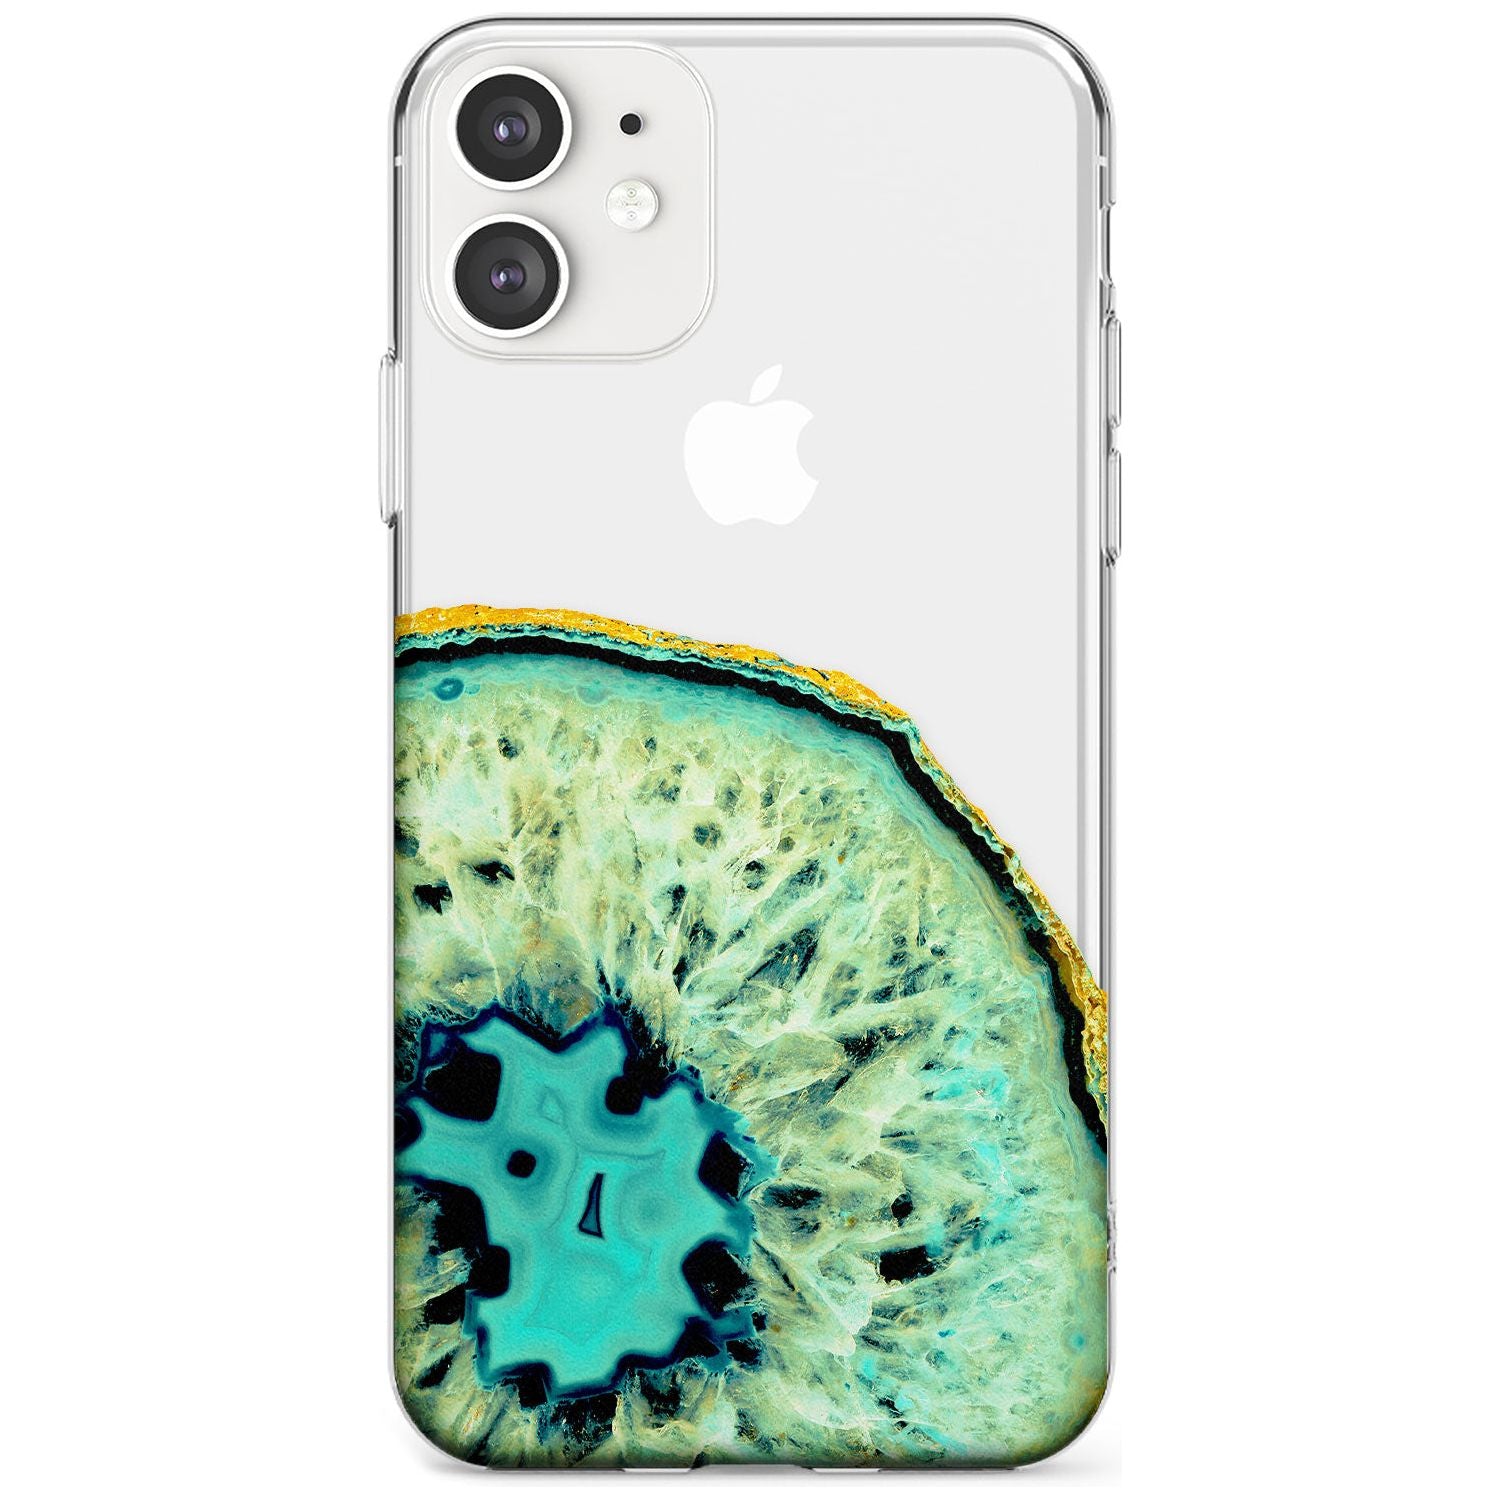 Turquoise & Green Gemstone Crystal Clear Design Slim TPU Phone Case for iPhone 11